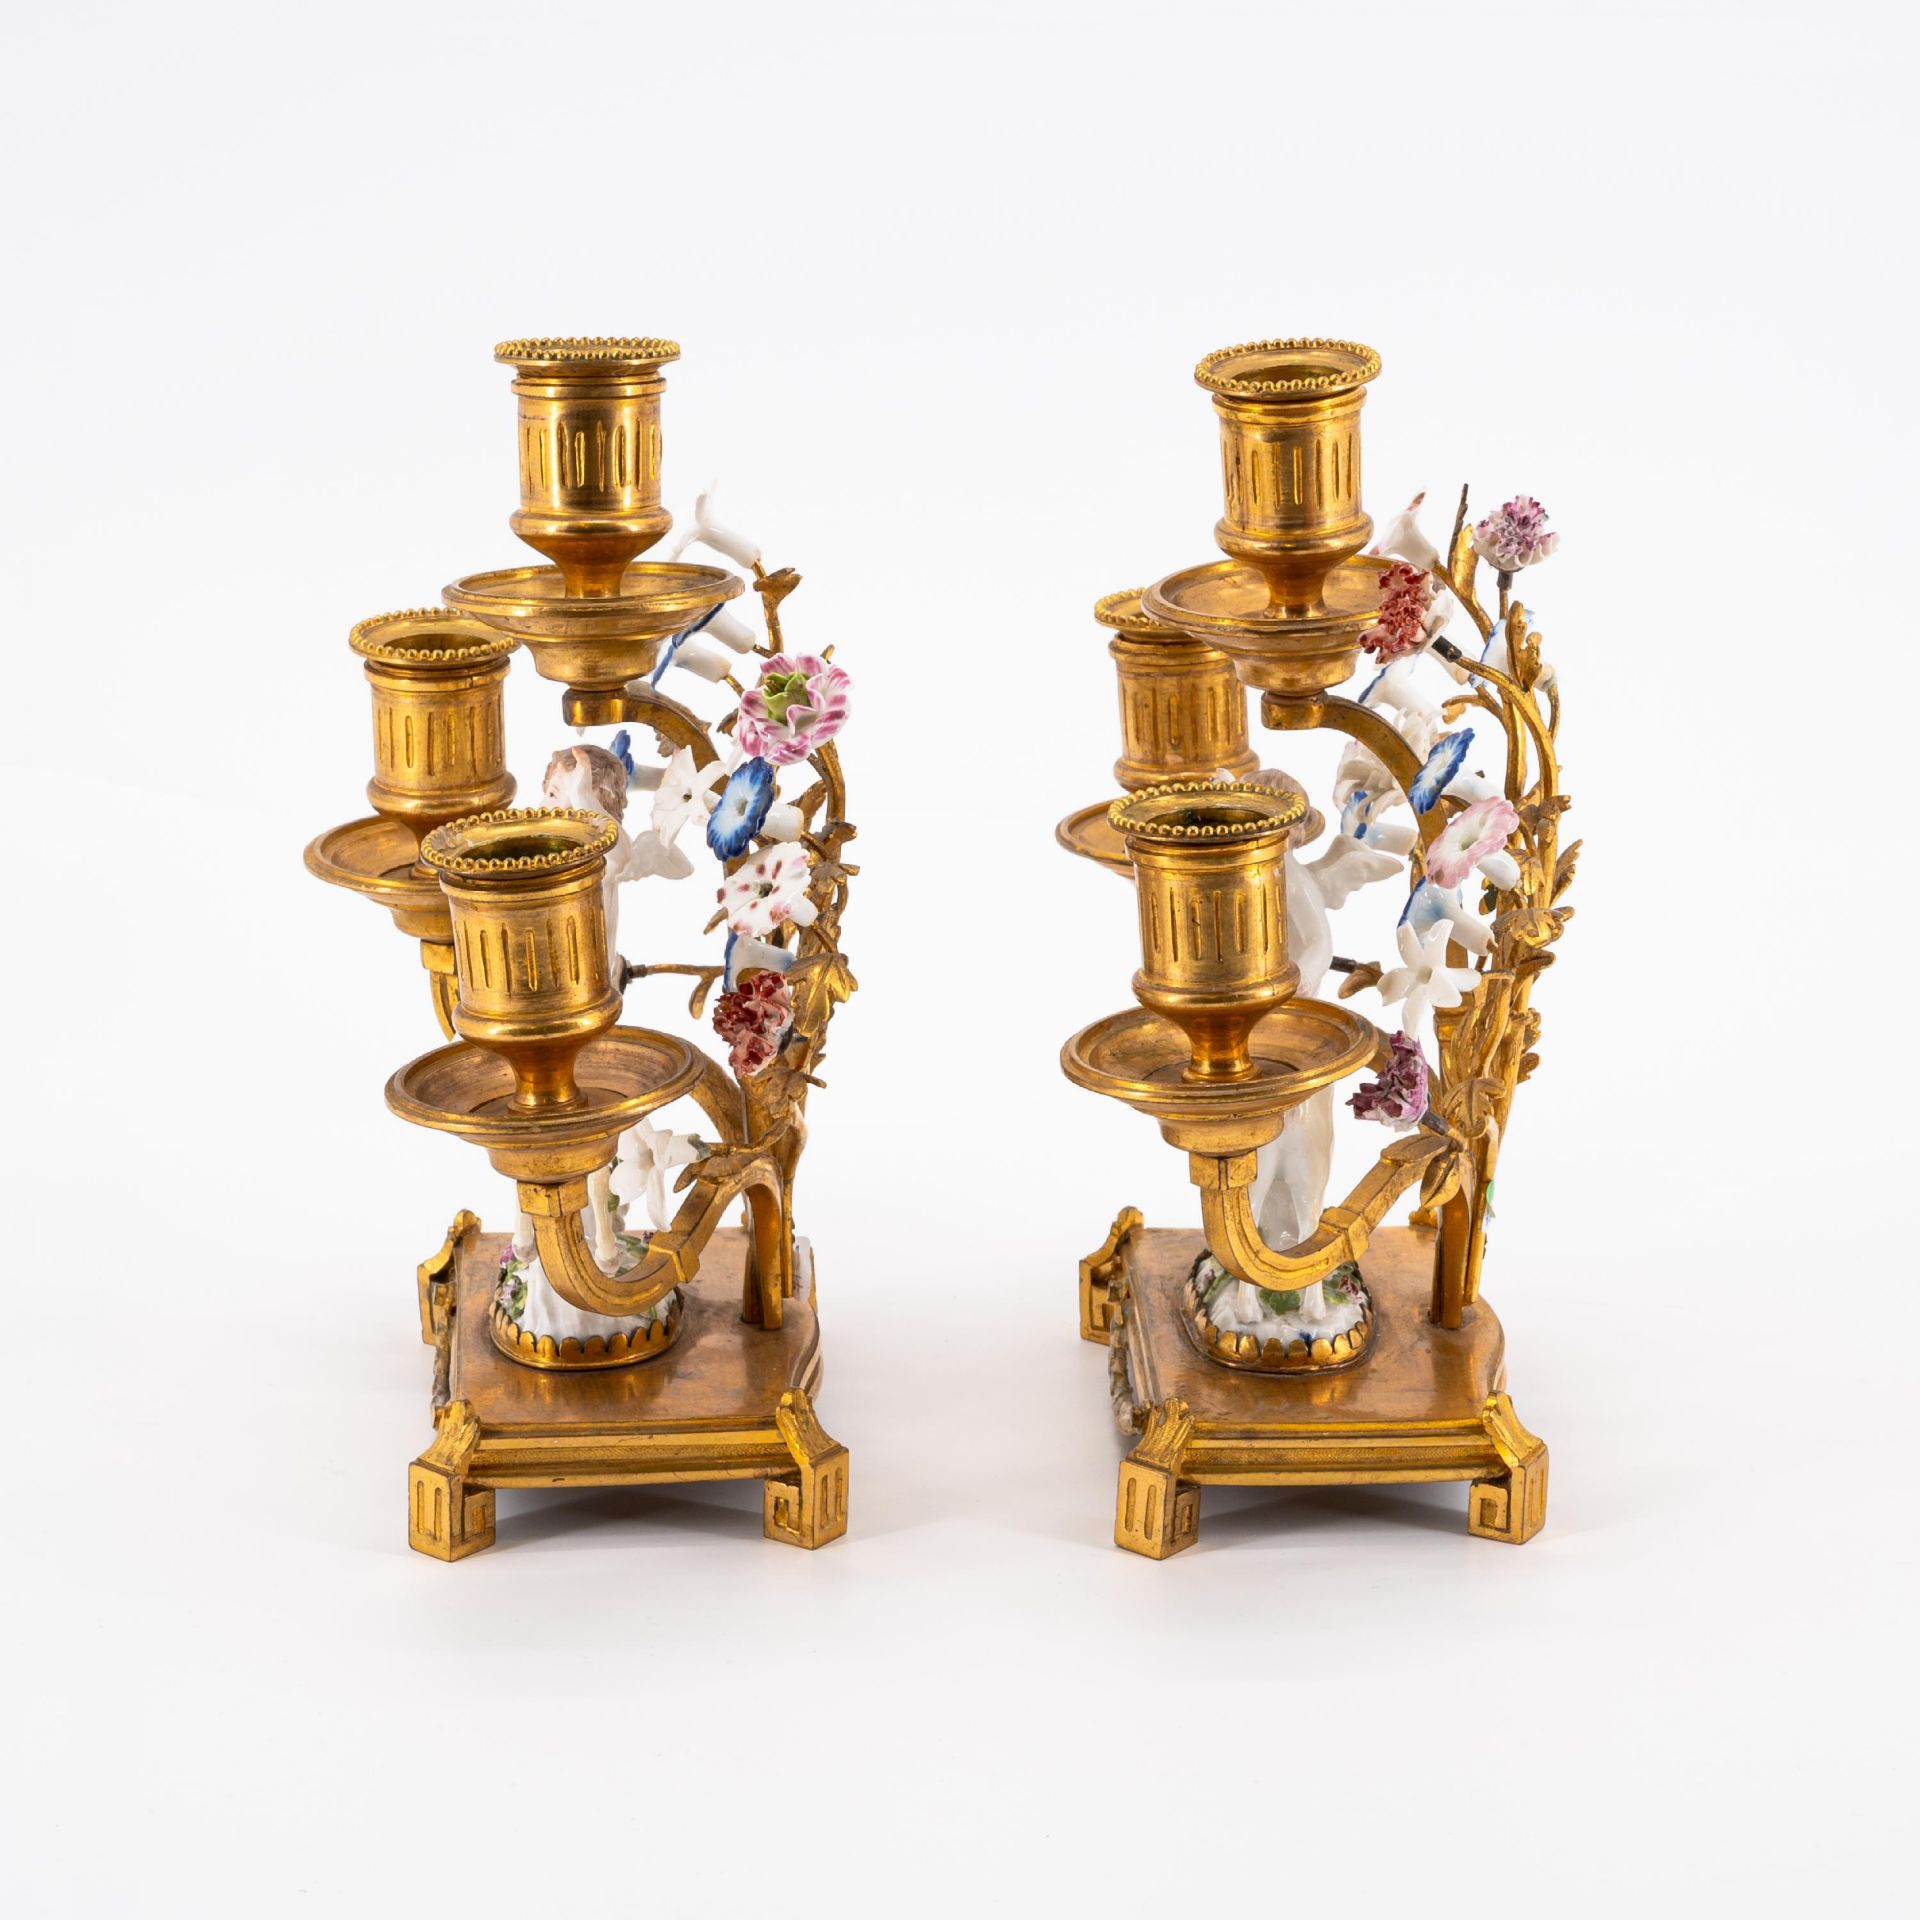 BRONZE PAIR OF THREE-LIGHT CANDLESTICKS WITH CUPIDS RIDING HORSES - Image 3 of 6